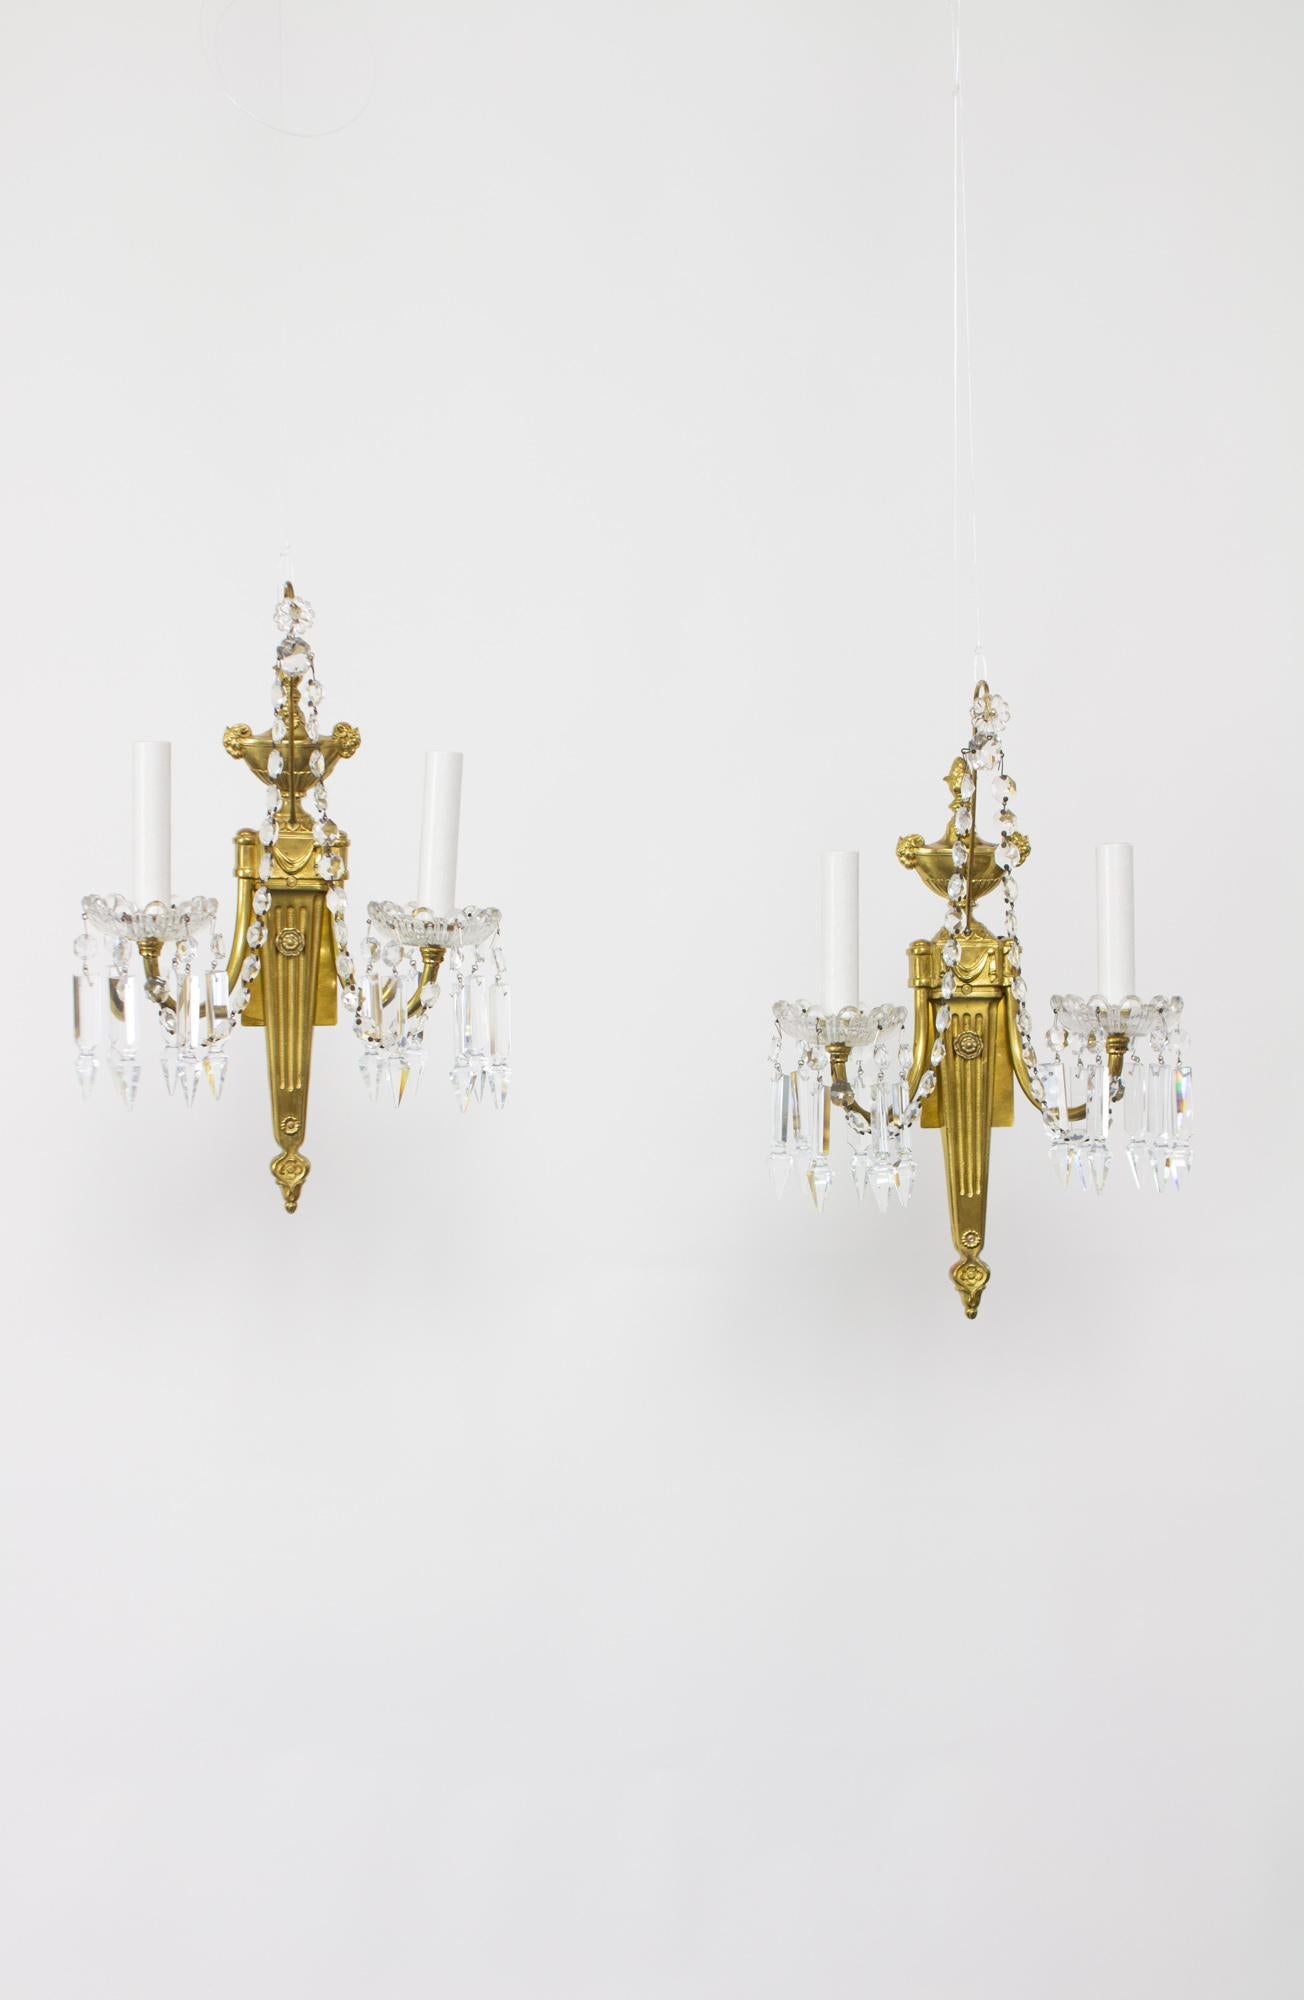 A beautiful pair of neoclassical two arm brass and crystal sconces. A long backplate with an urn form top with signature rams heads for arms. The center is column form, tapering to a rosette. The arms are simple curved brass. Crystal chains swoop